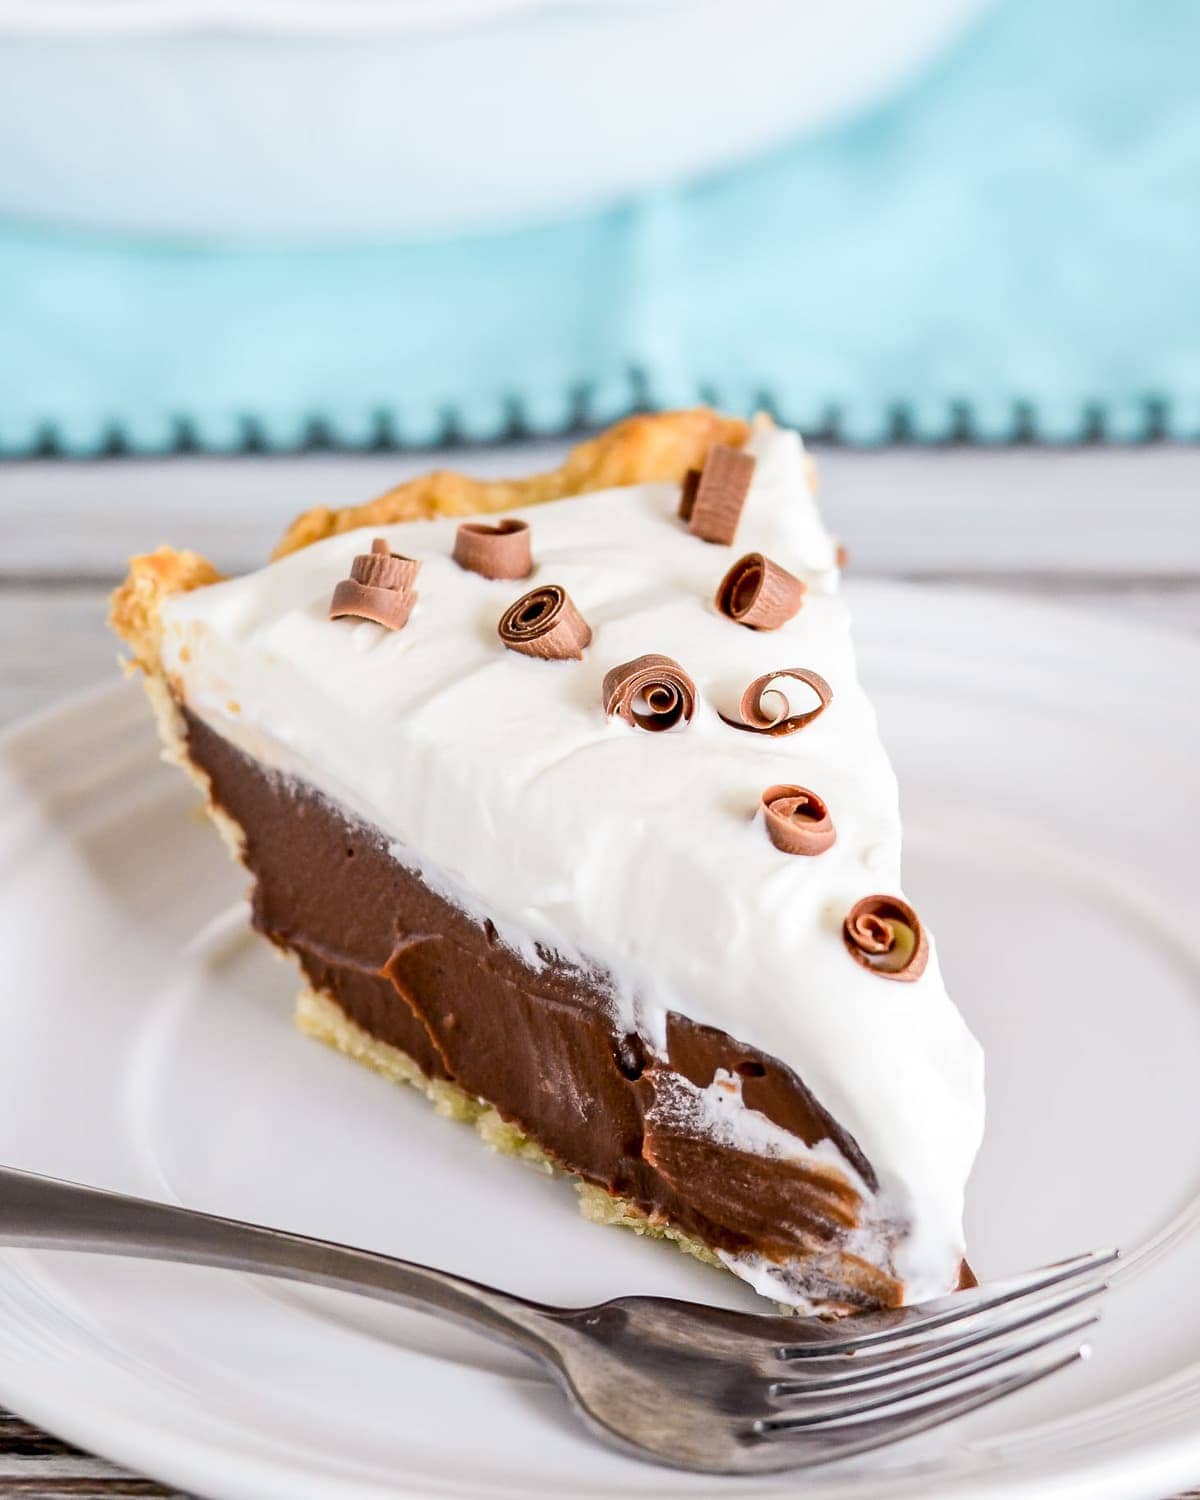 Chocolate Cream Pie recipe slice topped with chocolate curls on a white plate